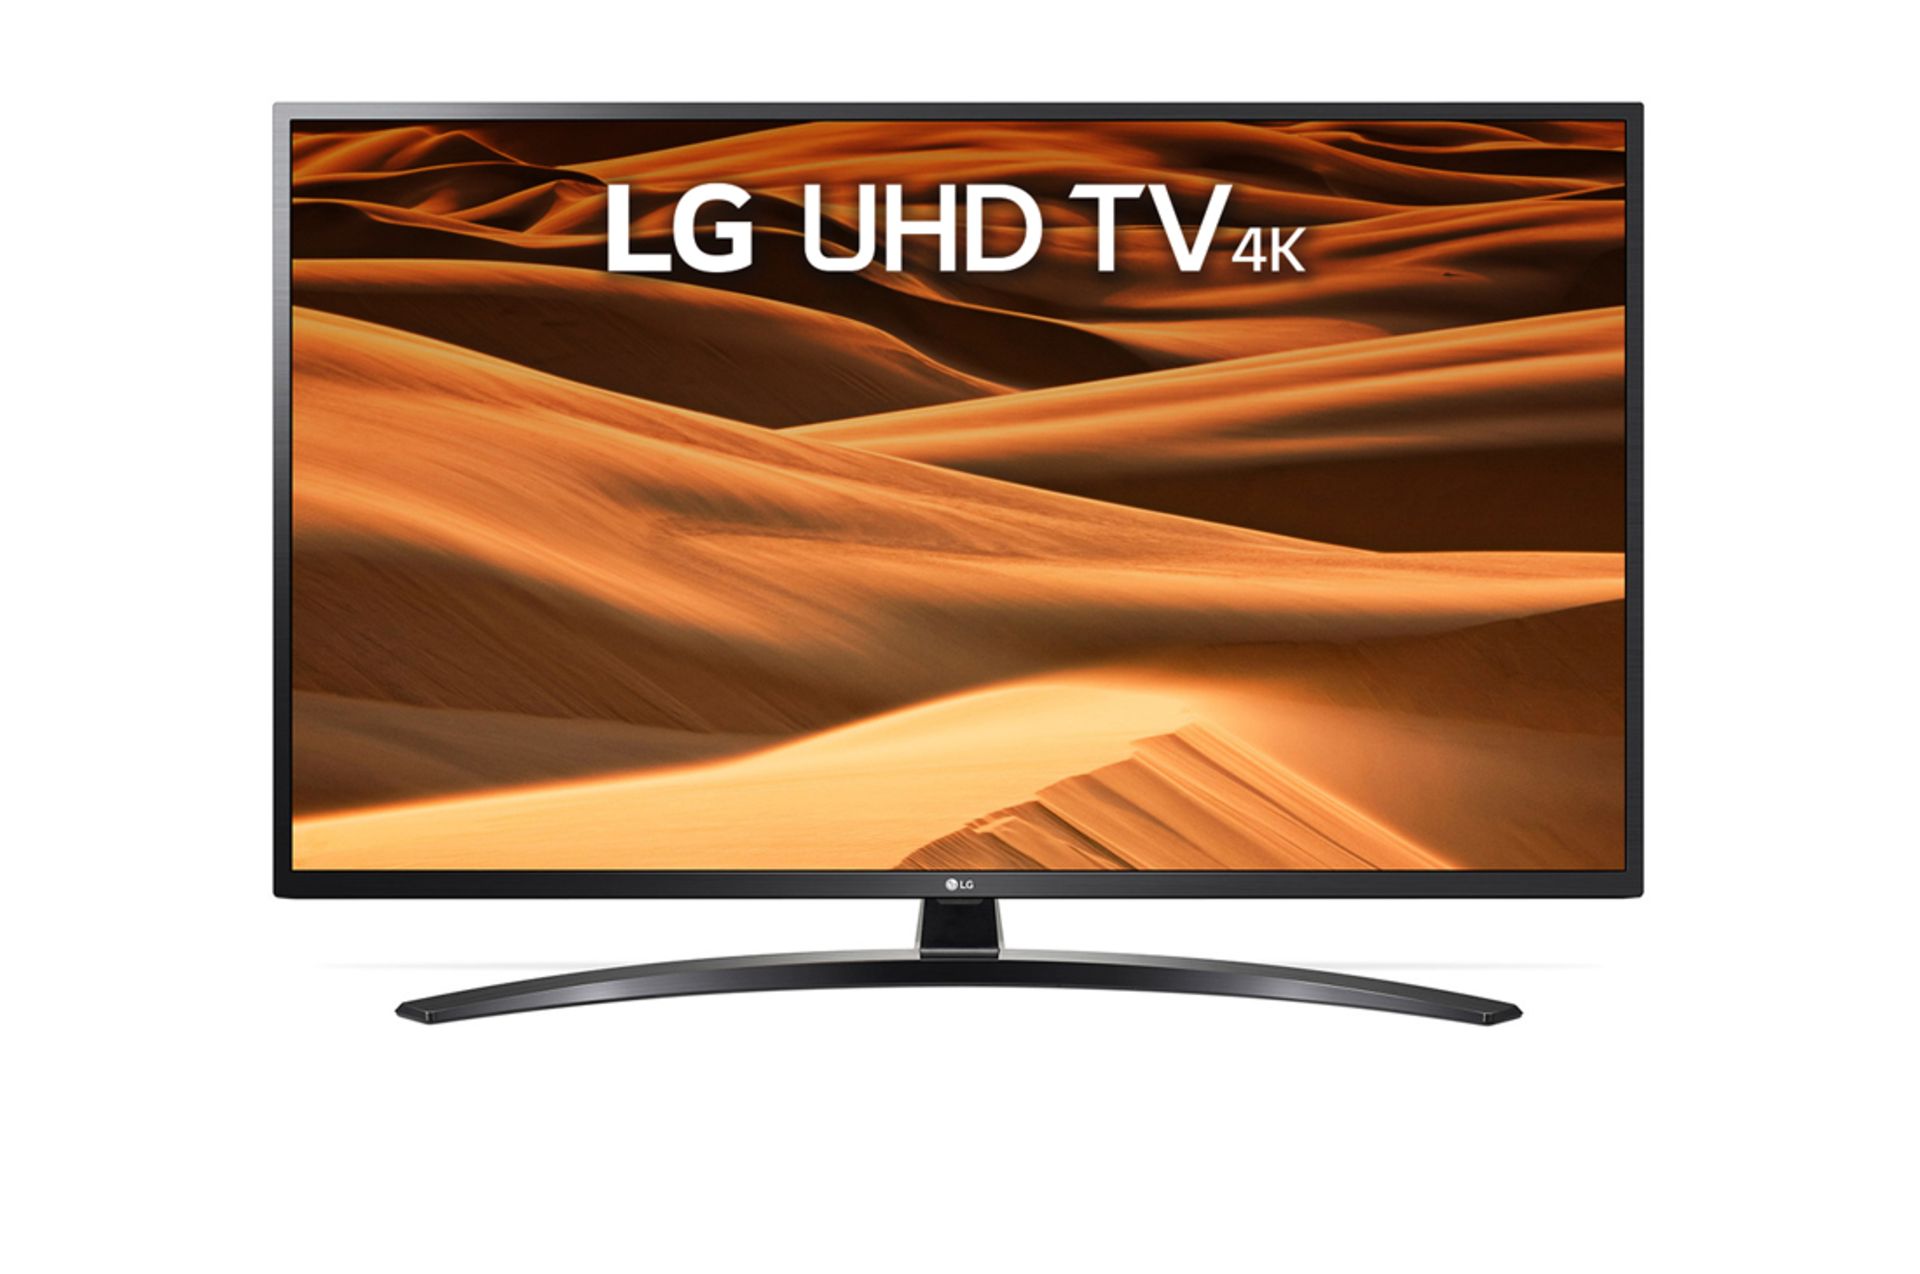 V Grade A LG 50 Inch ACTIVE HDR 4K ULTRA HD LED SMART TV WITH FREEVIEW HD & WEBOS & WIFI - AI TV